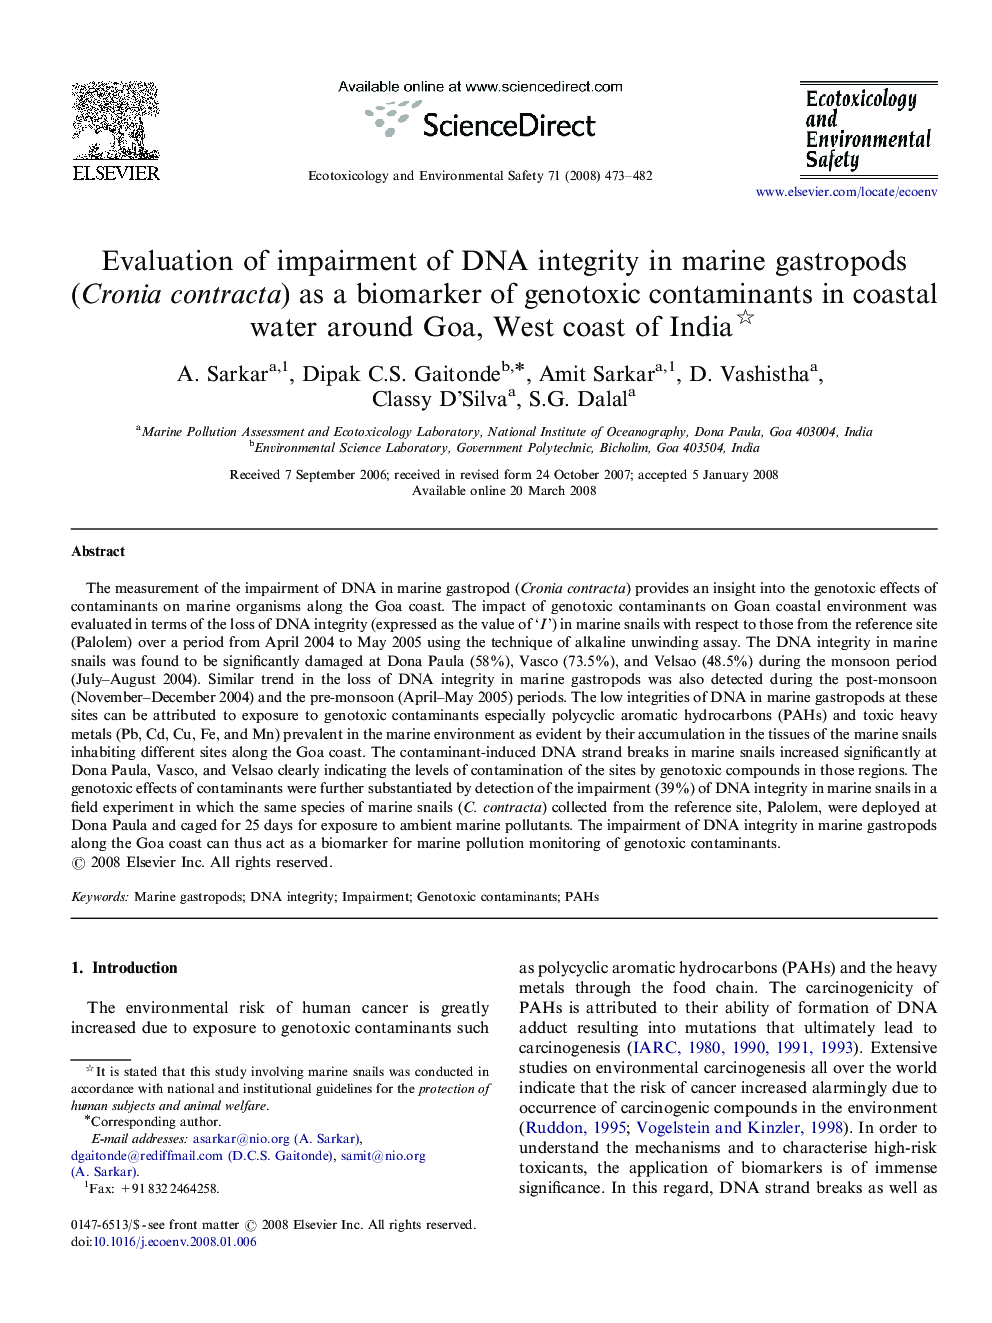 Evaluation of impairment of DNA integrity in marine gastropods (Cronia contracta) as a biomarker of genotoxic contaminants in coastal water around Goa, West coast of India 